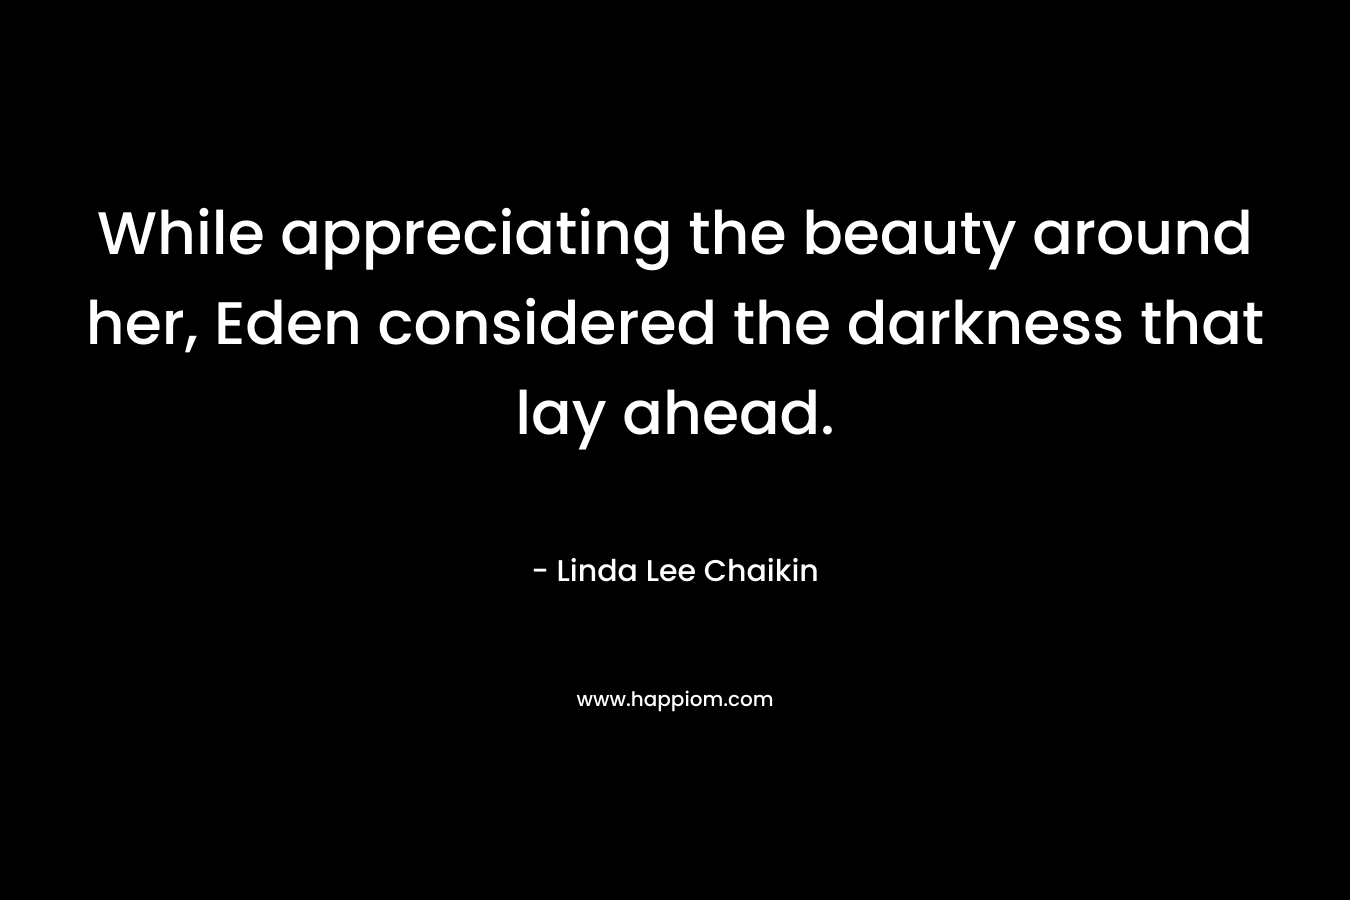 While appreciating the beauty around her, Eden considered the darkness that lay ahead.  – Linda Lee Chaikin